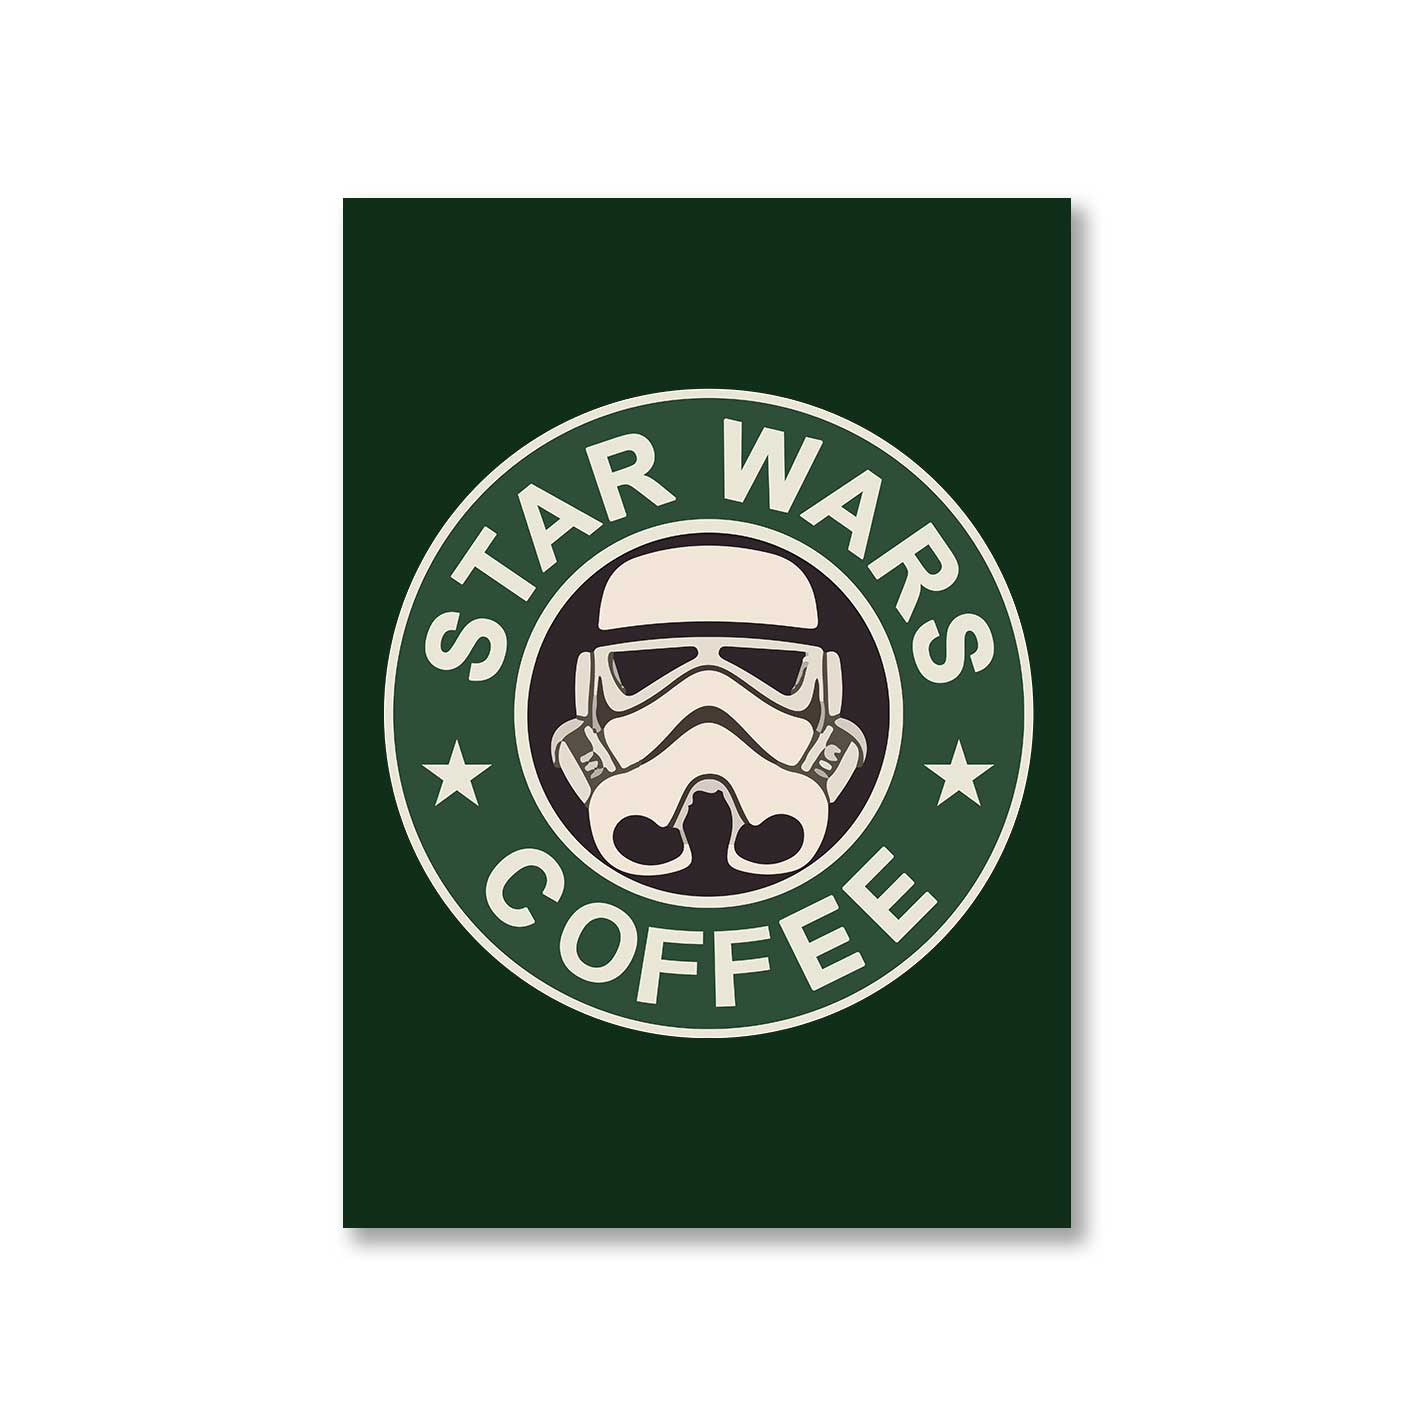 star wars star coffee poster wall art buy online india the banyan tee tbt a4